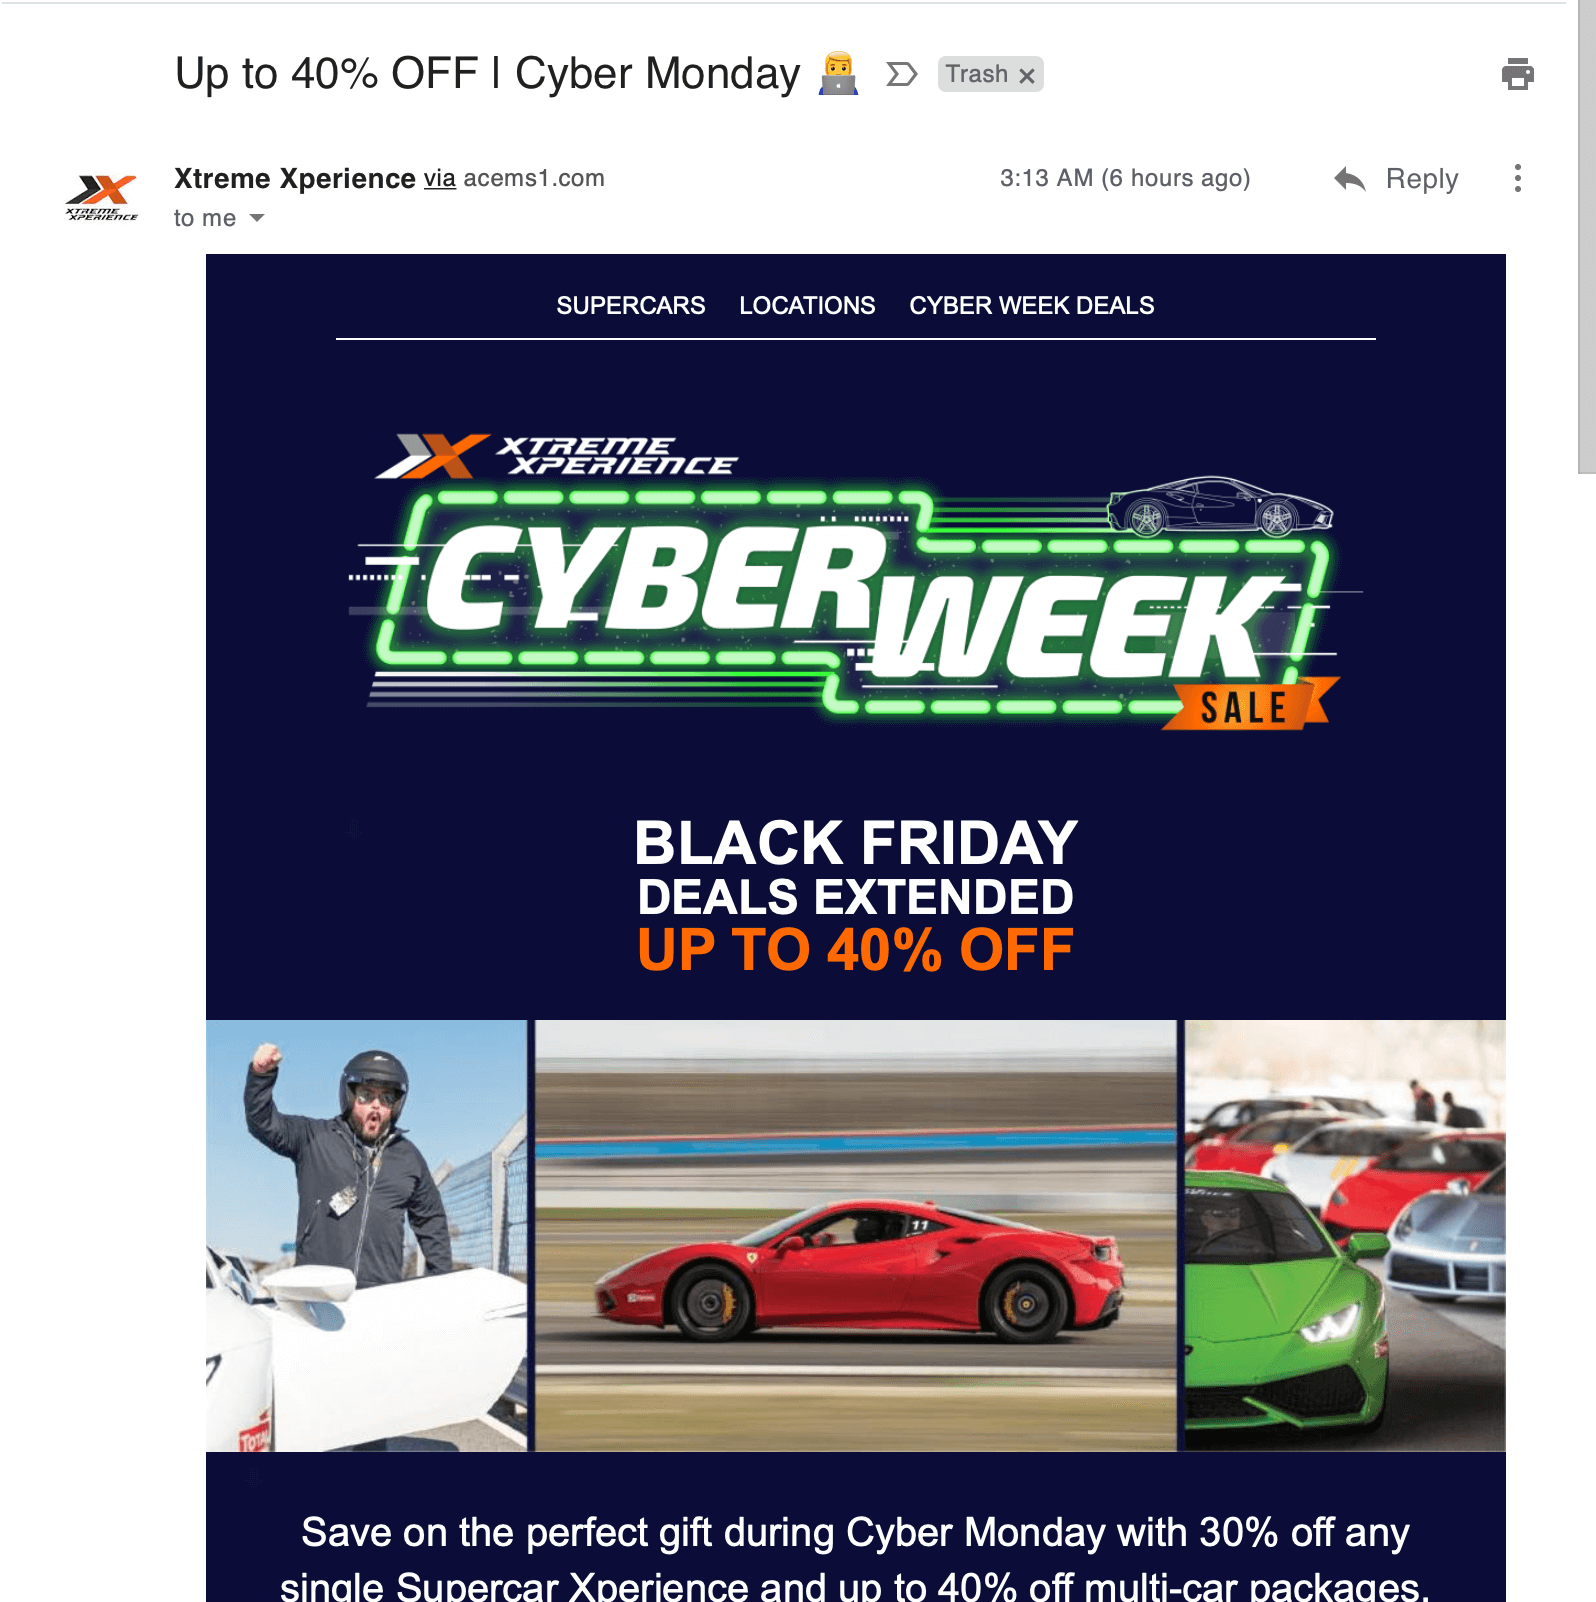 Email from Xtreme Xperience after loading images